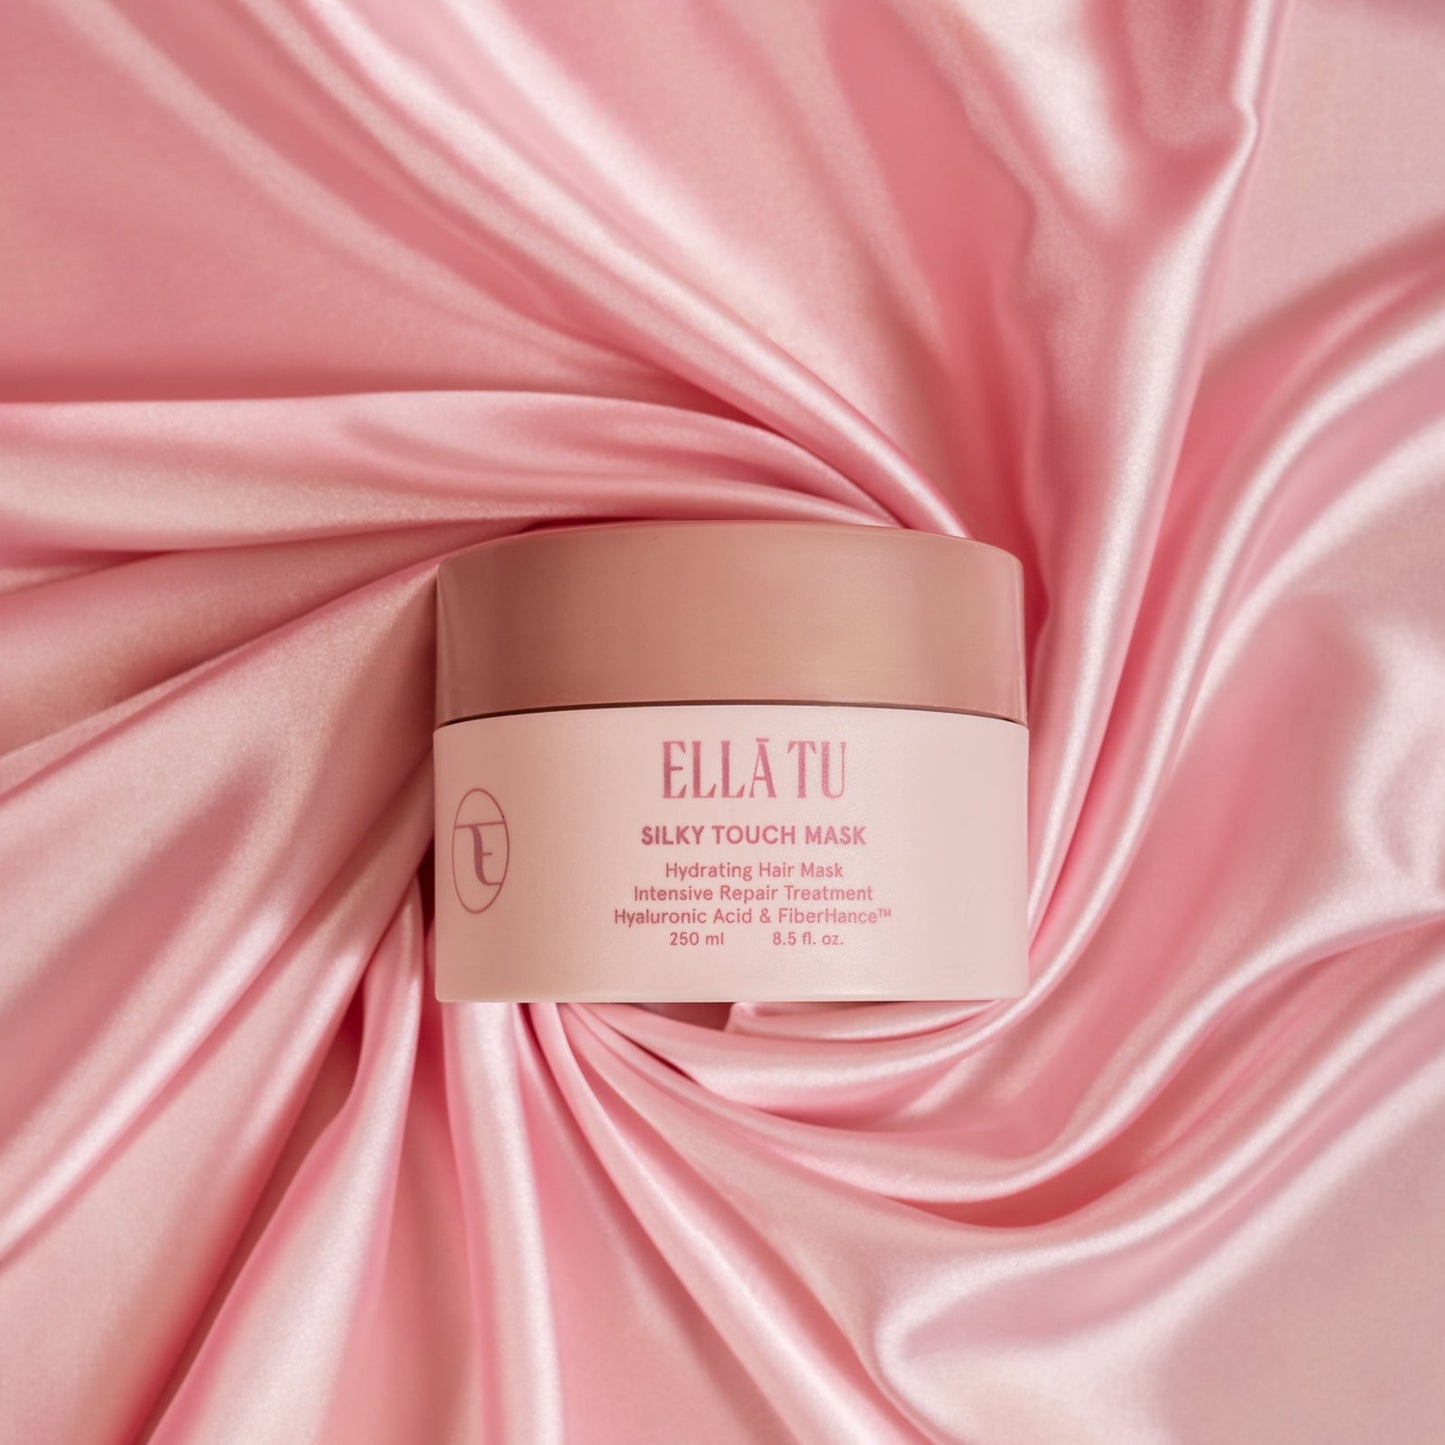 The Ellatu Silky Touch Hair Mask for dry damaged hair, formulated with patented ingredient Fiberhance as well as Moringa Oil, Castor Oil, Hyaluronic Acid and more for deep hydration and nurture for hair.